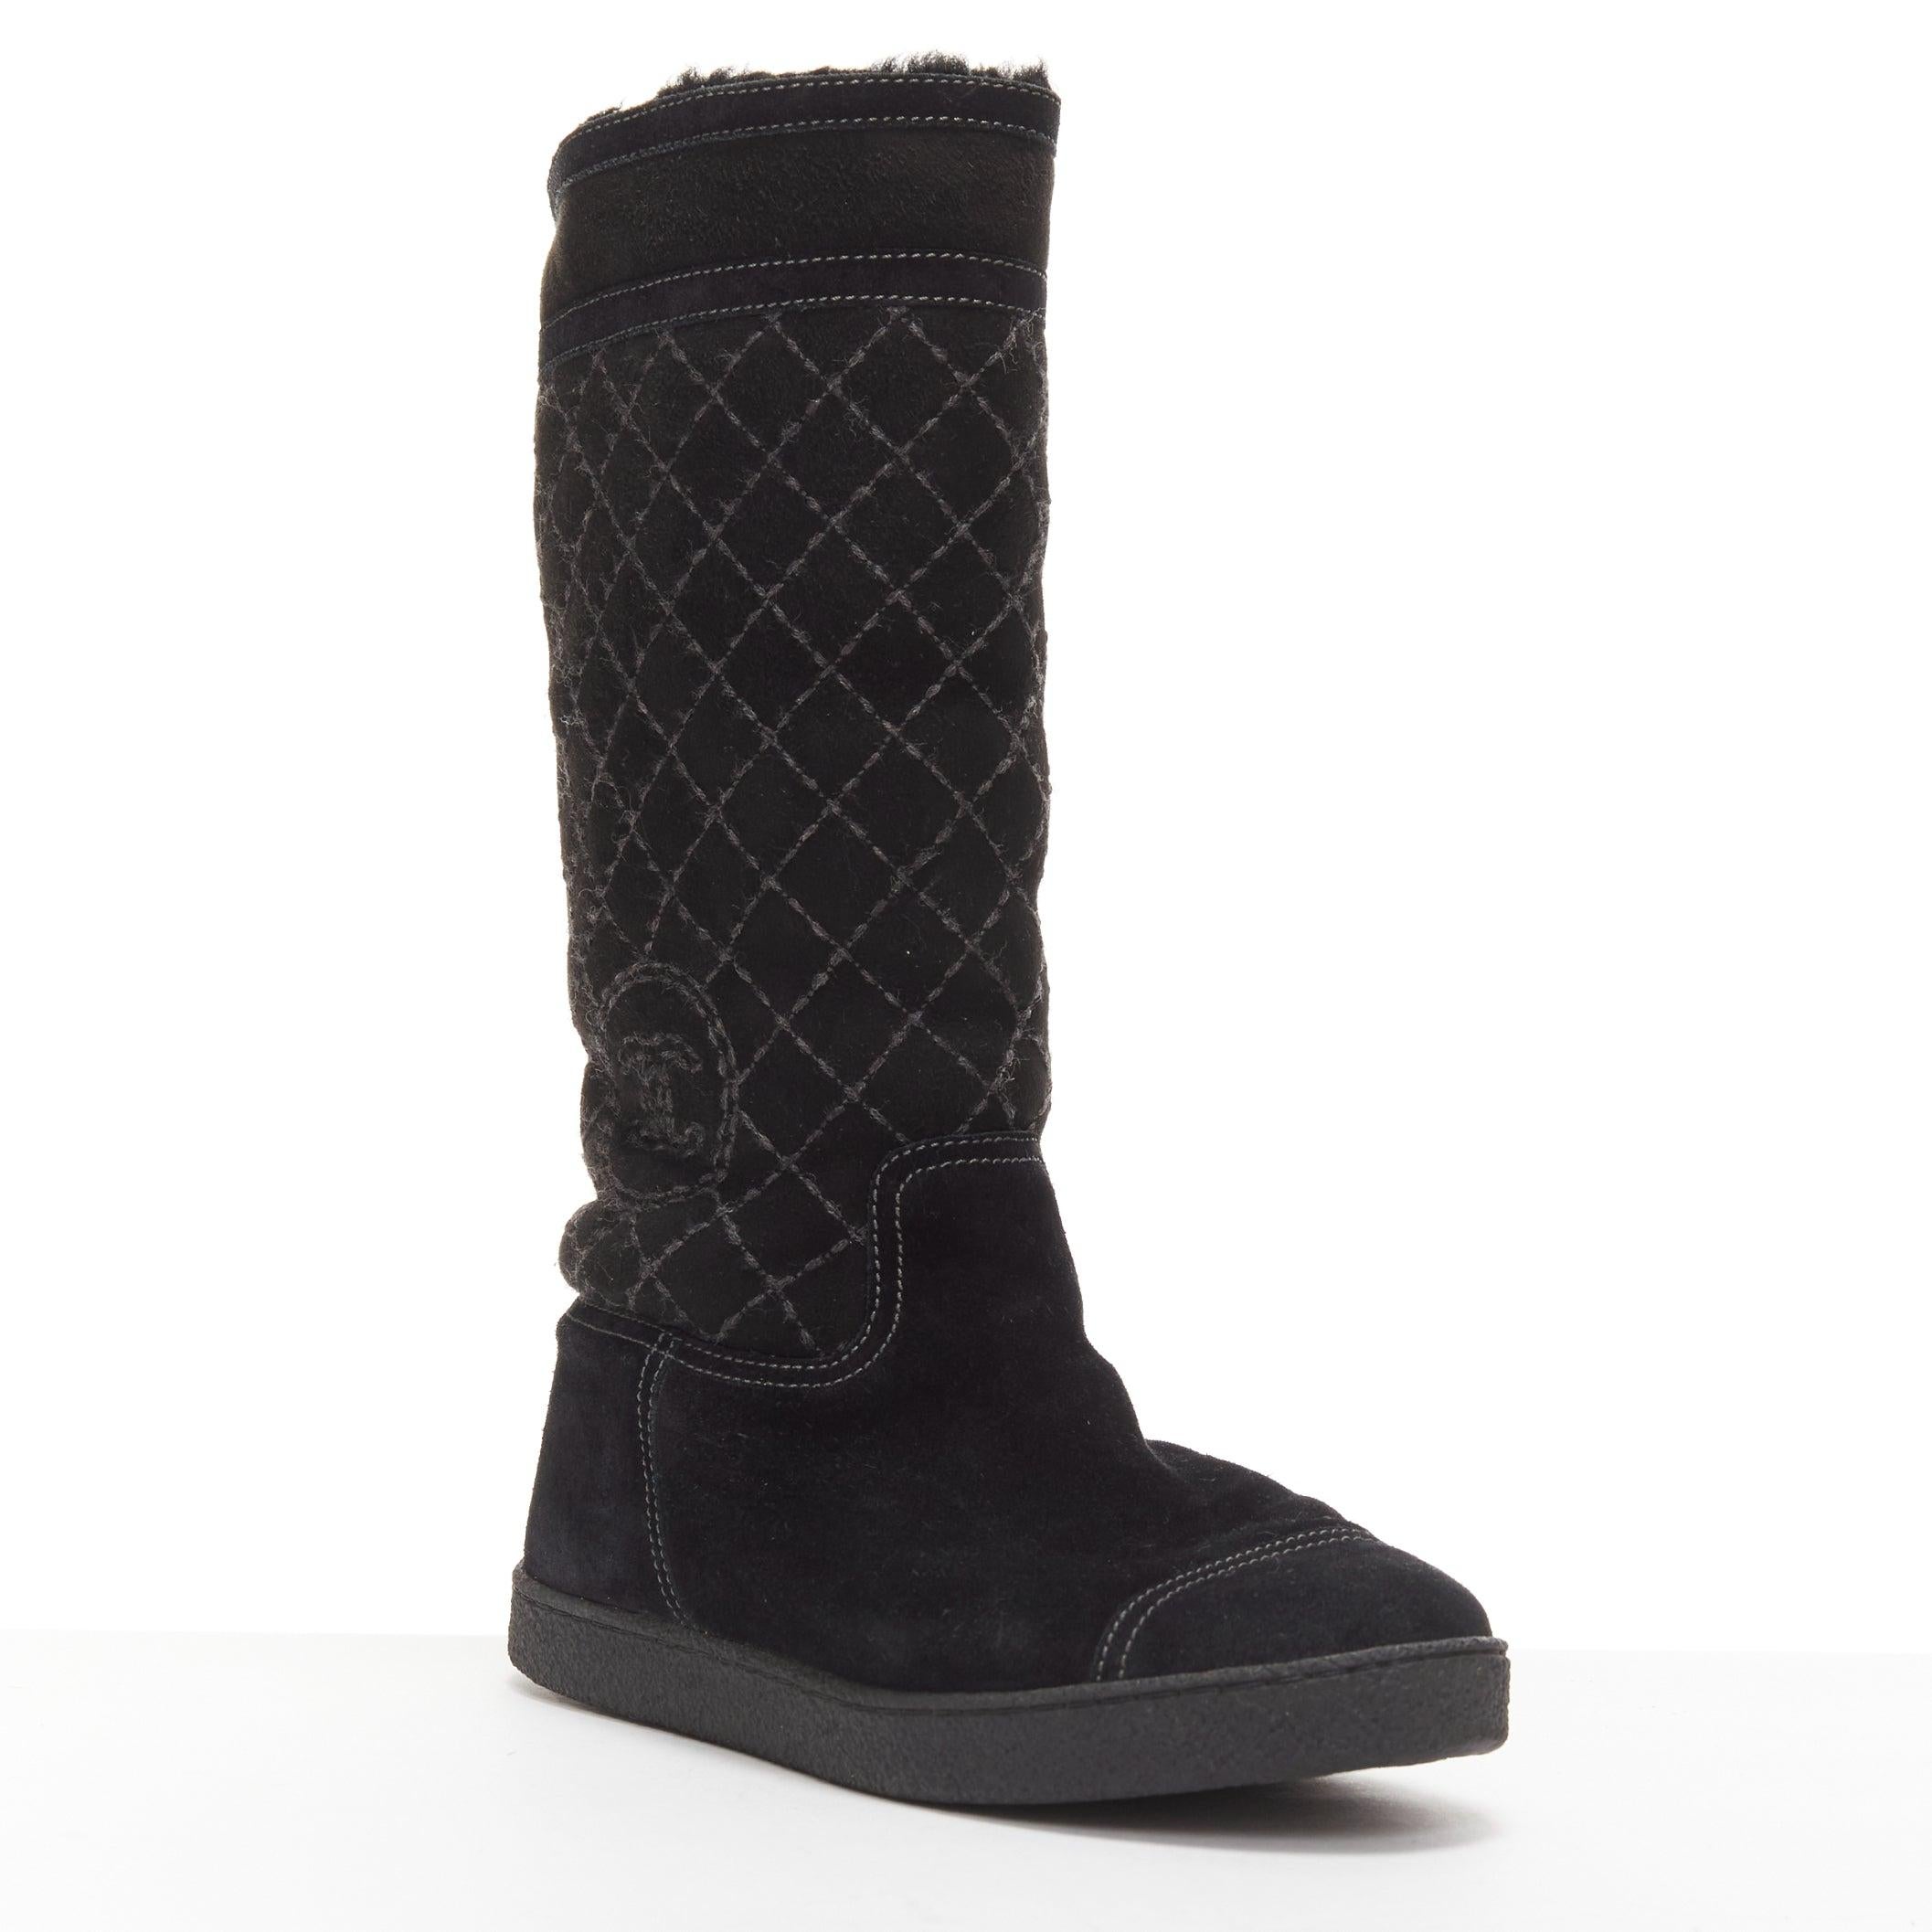 CHANEL black matelasse diamond quilt stitch suede CC logo shearling boots EU38
Reference: TGAS/D01097
Brand: Chanel
Designer: Karl Lagerfeld
Material: Suede
Color: Black
Pattern: Solid
Closure: Slip On
Lining: Black Shearling
Extra Details: CC logo